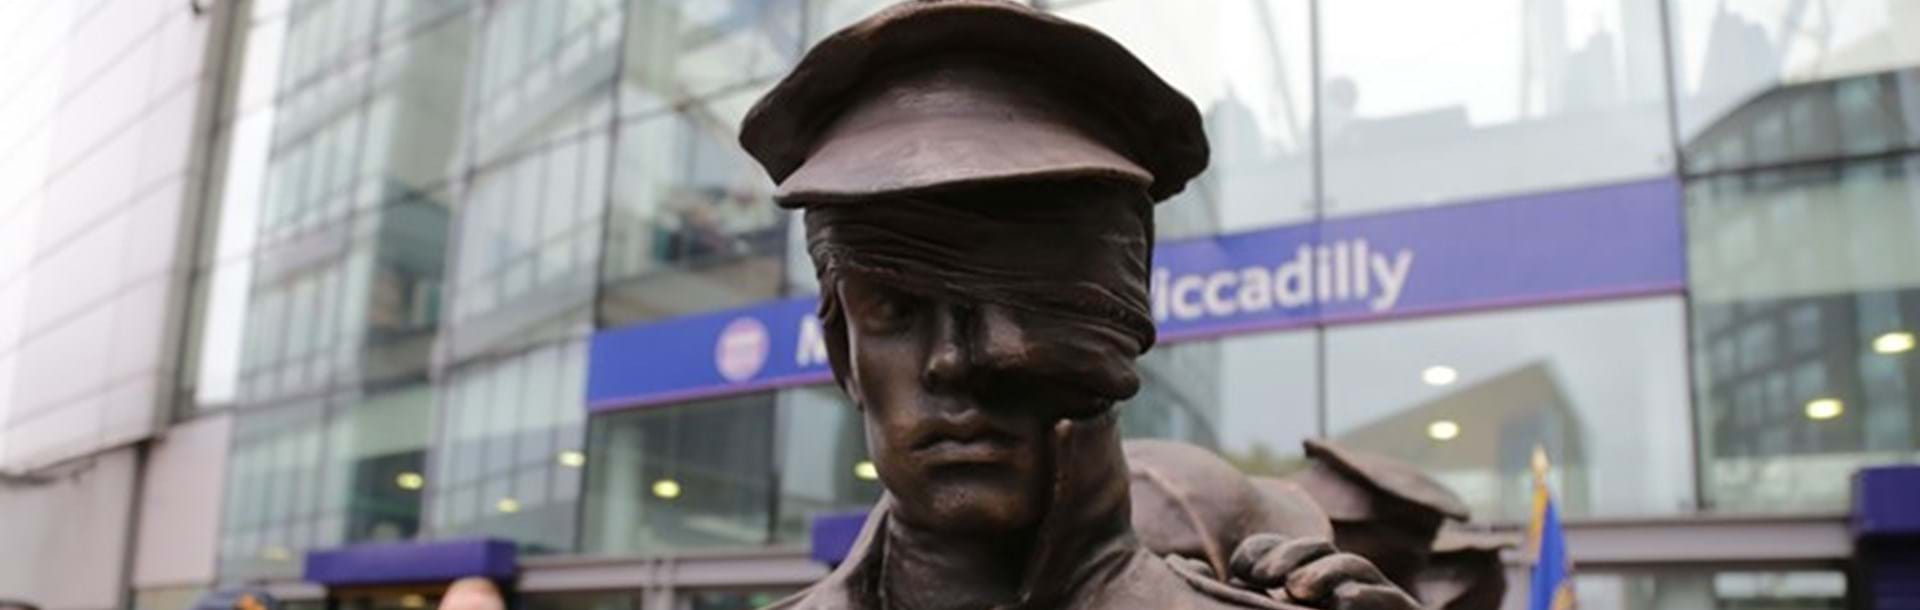 Please click to load the video - this is a video about the Victory over Blindness statue.